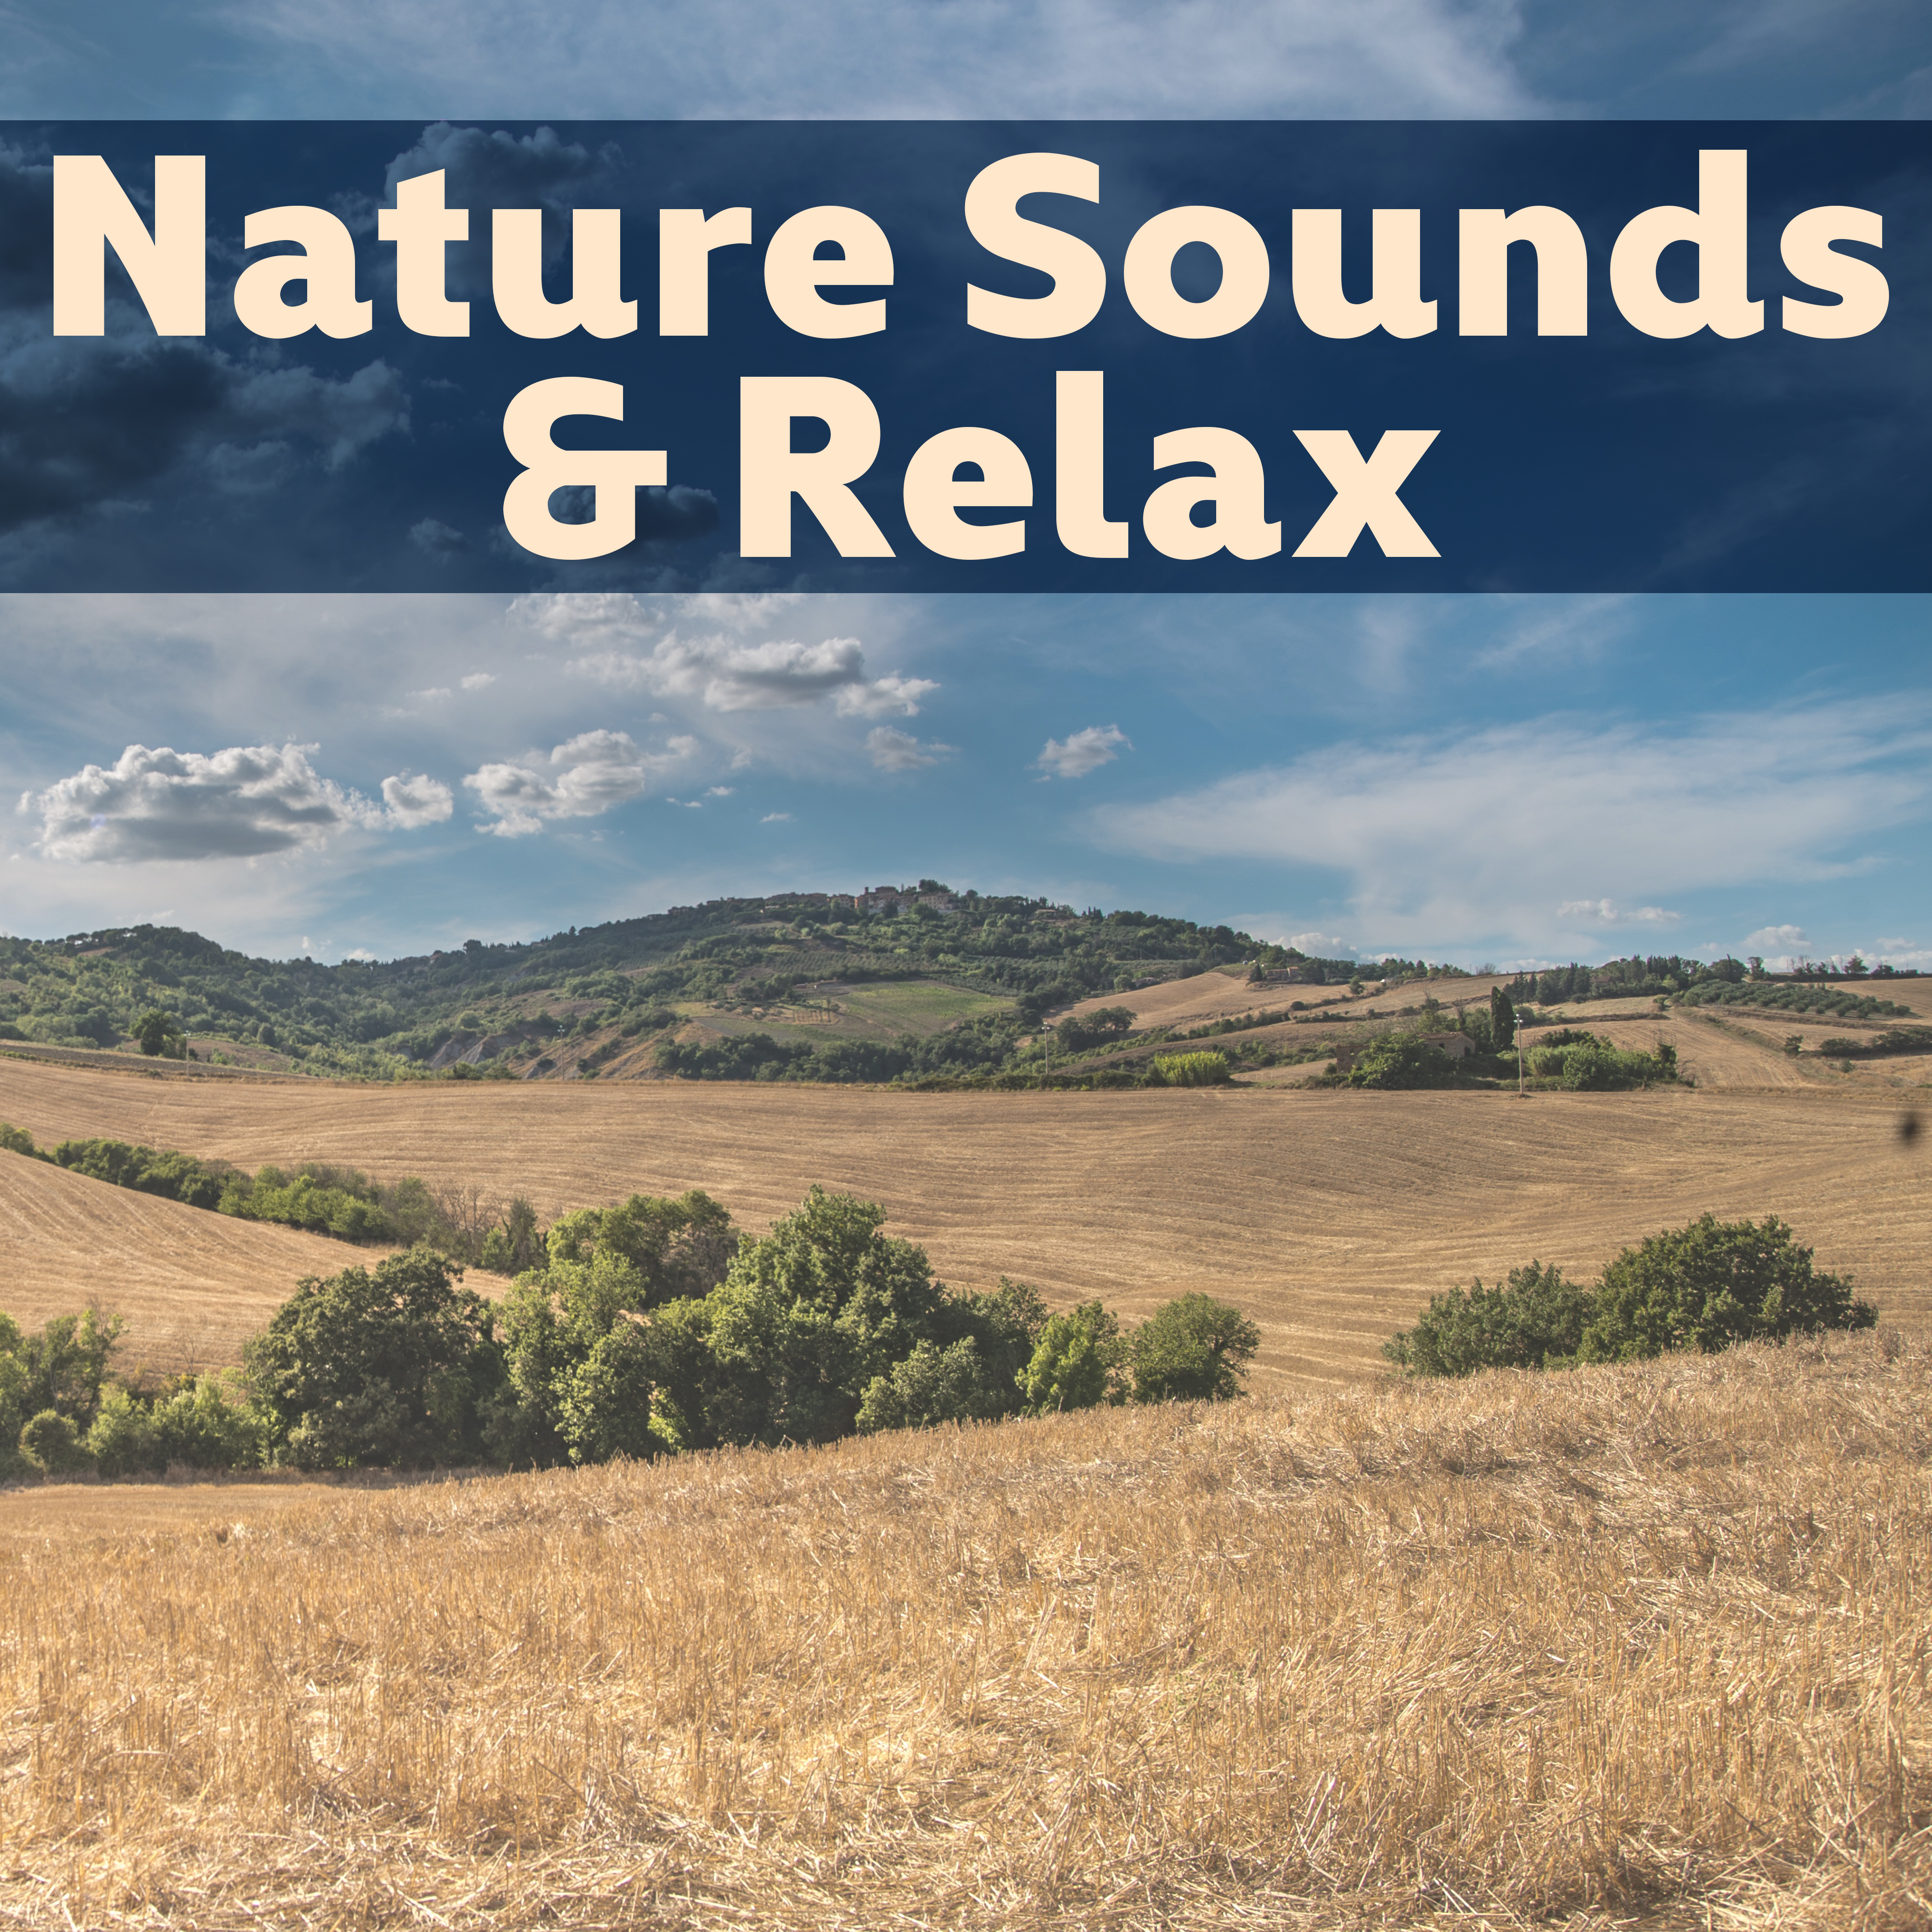 Nature Sounds & Relax – Pure Relaxation, Soothing Music to Calm Down, Healing Water, Relaxing Waves, Ocean Dreams, Peaceful Mind